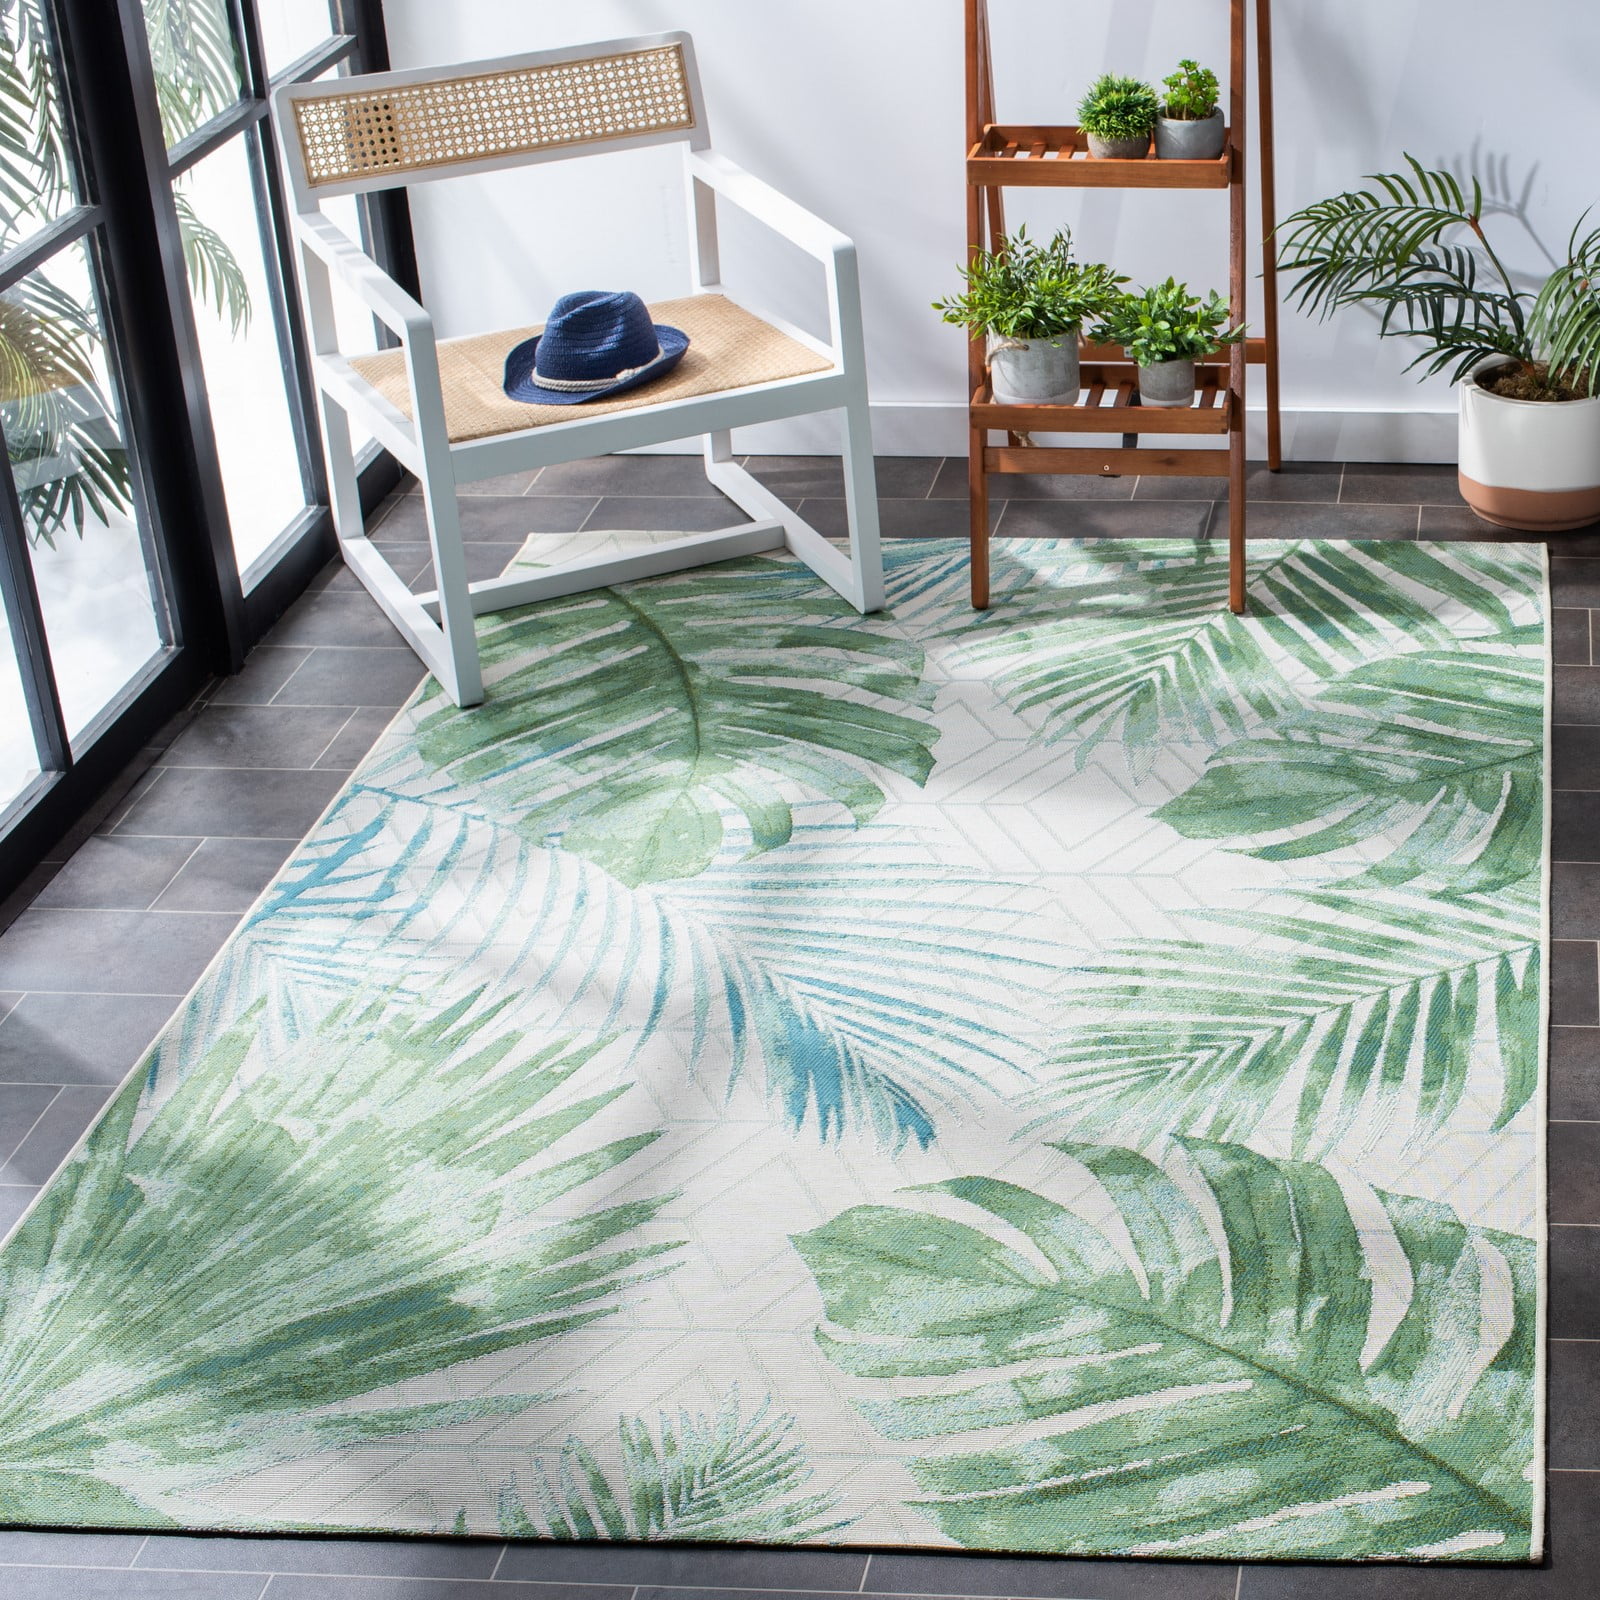 Tropical Palm Leaves Runner Rug Outdoor Patio Deck Porch Printed Rug 